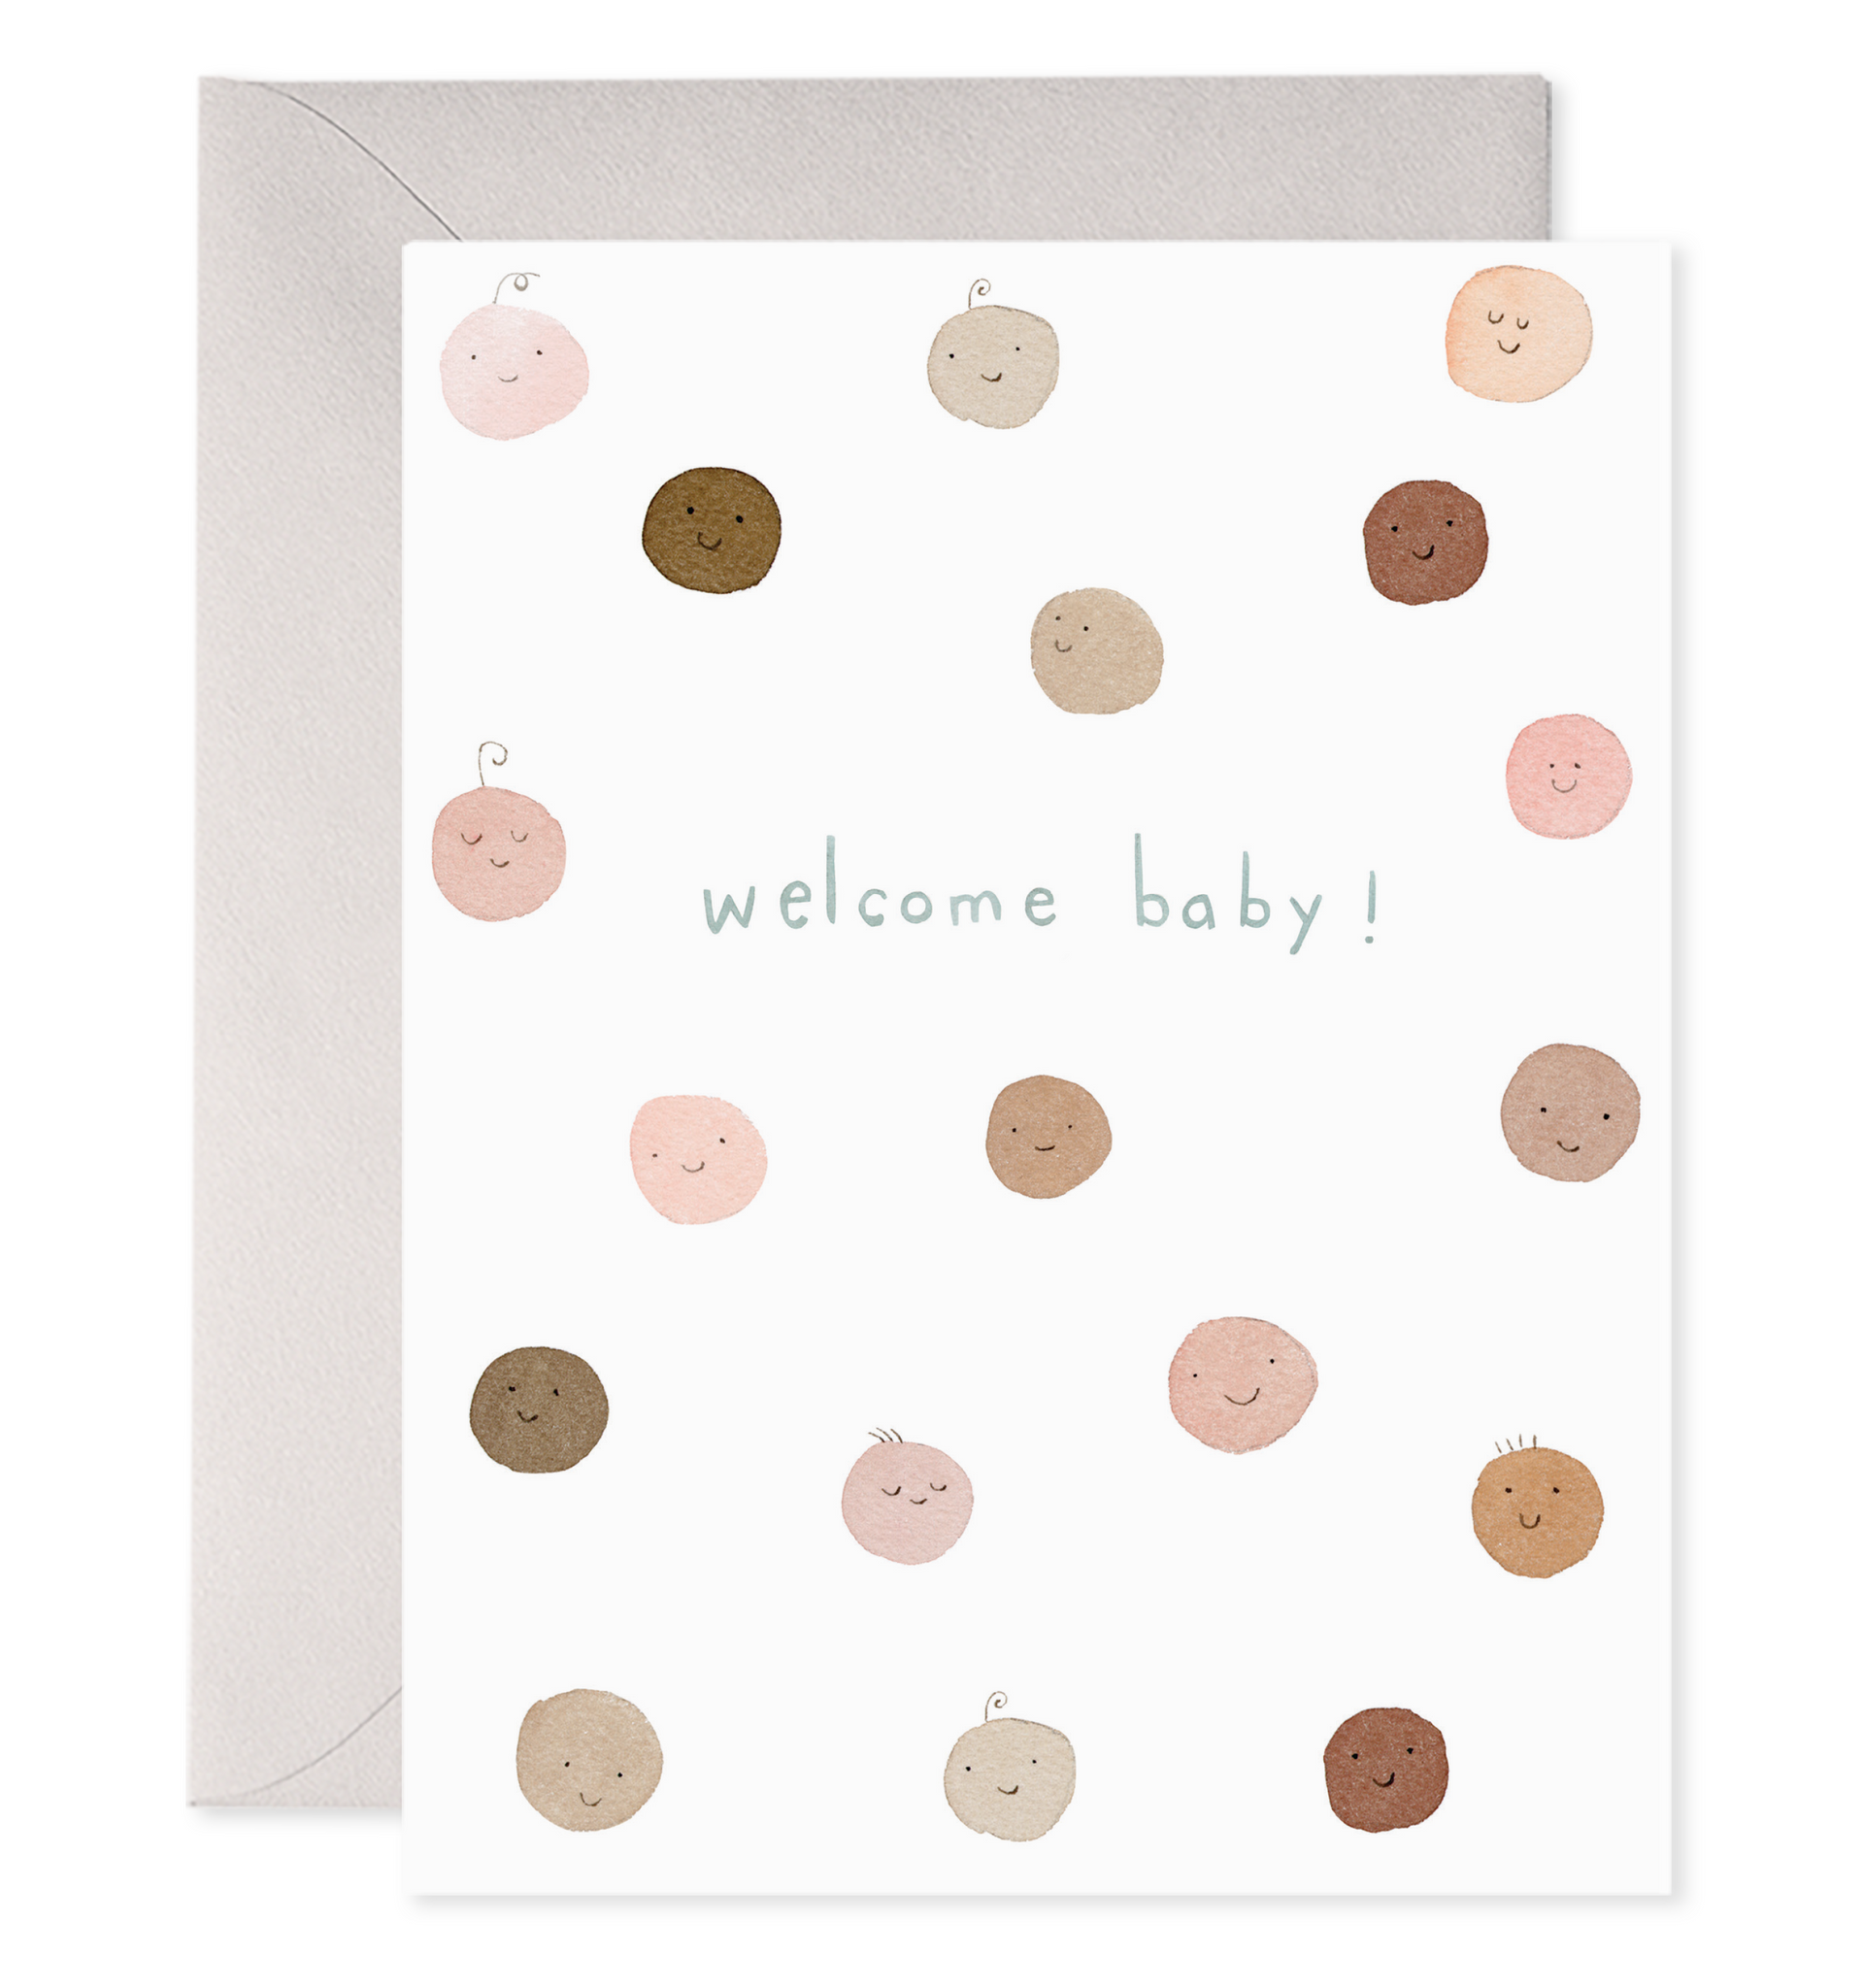 Greeting card with white background and images of babies faces in tan, pink, brown and cream, Grey envelope included. 